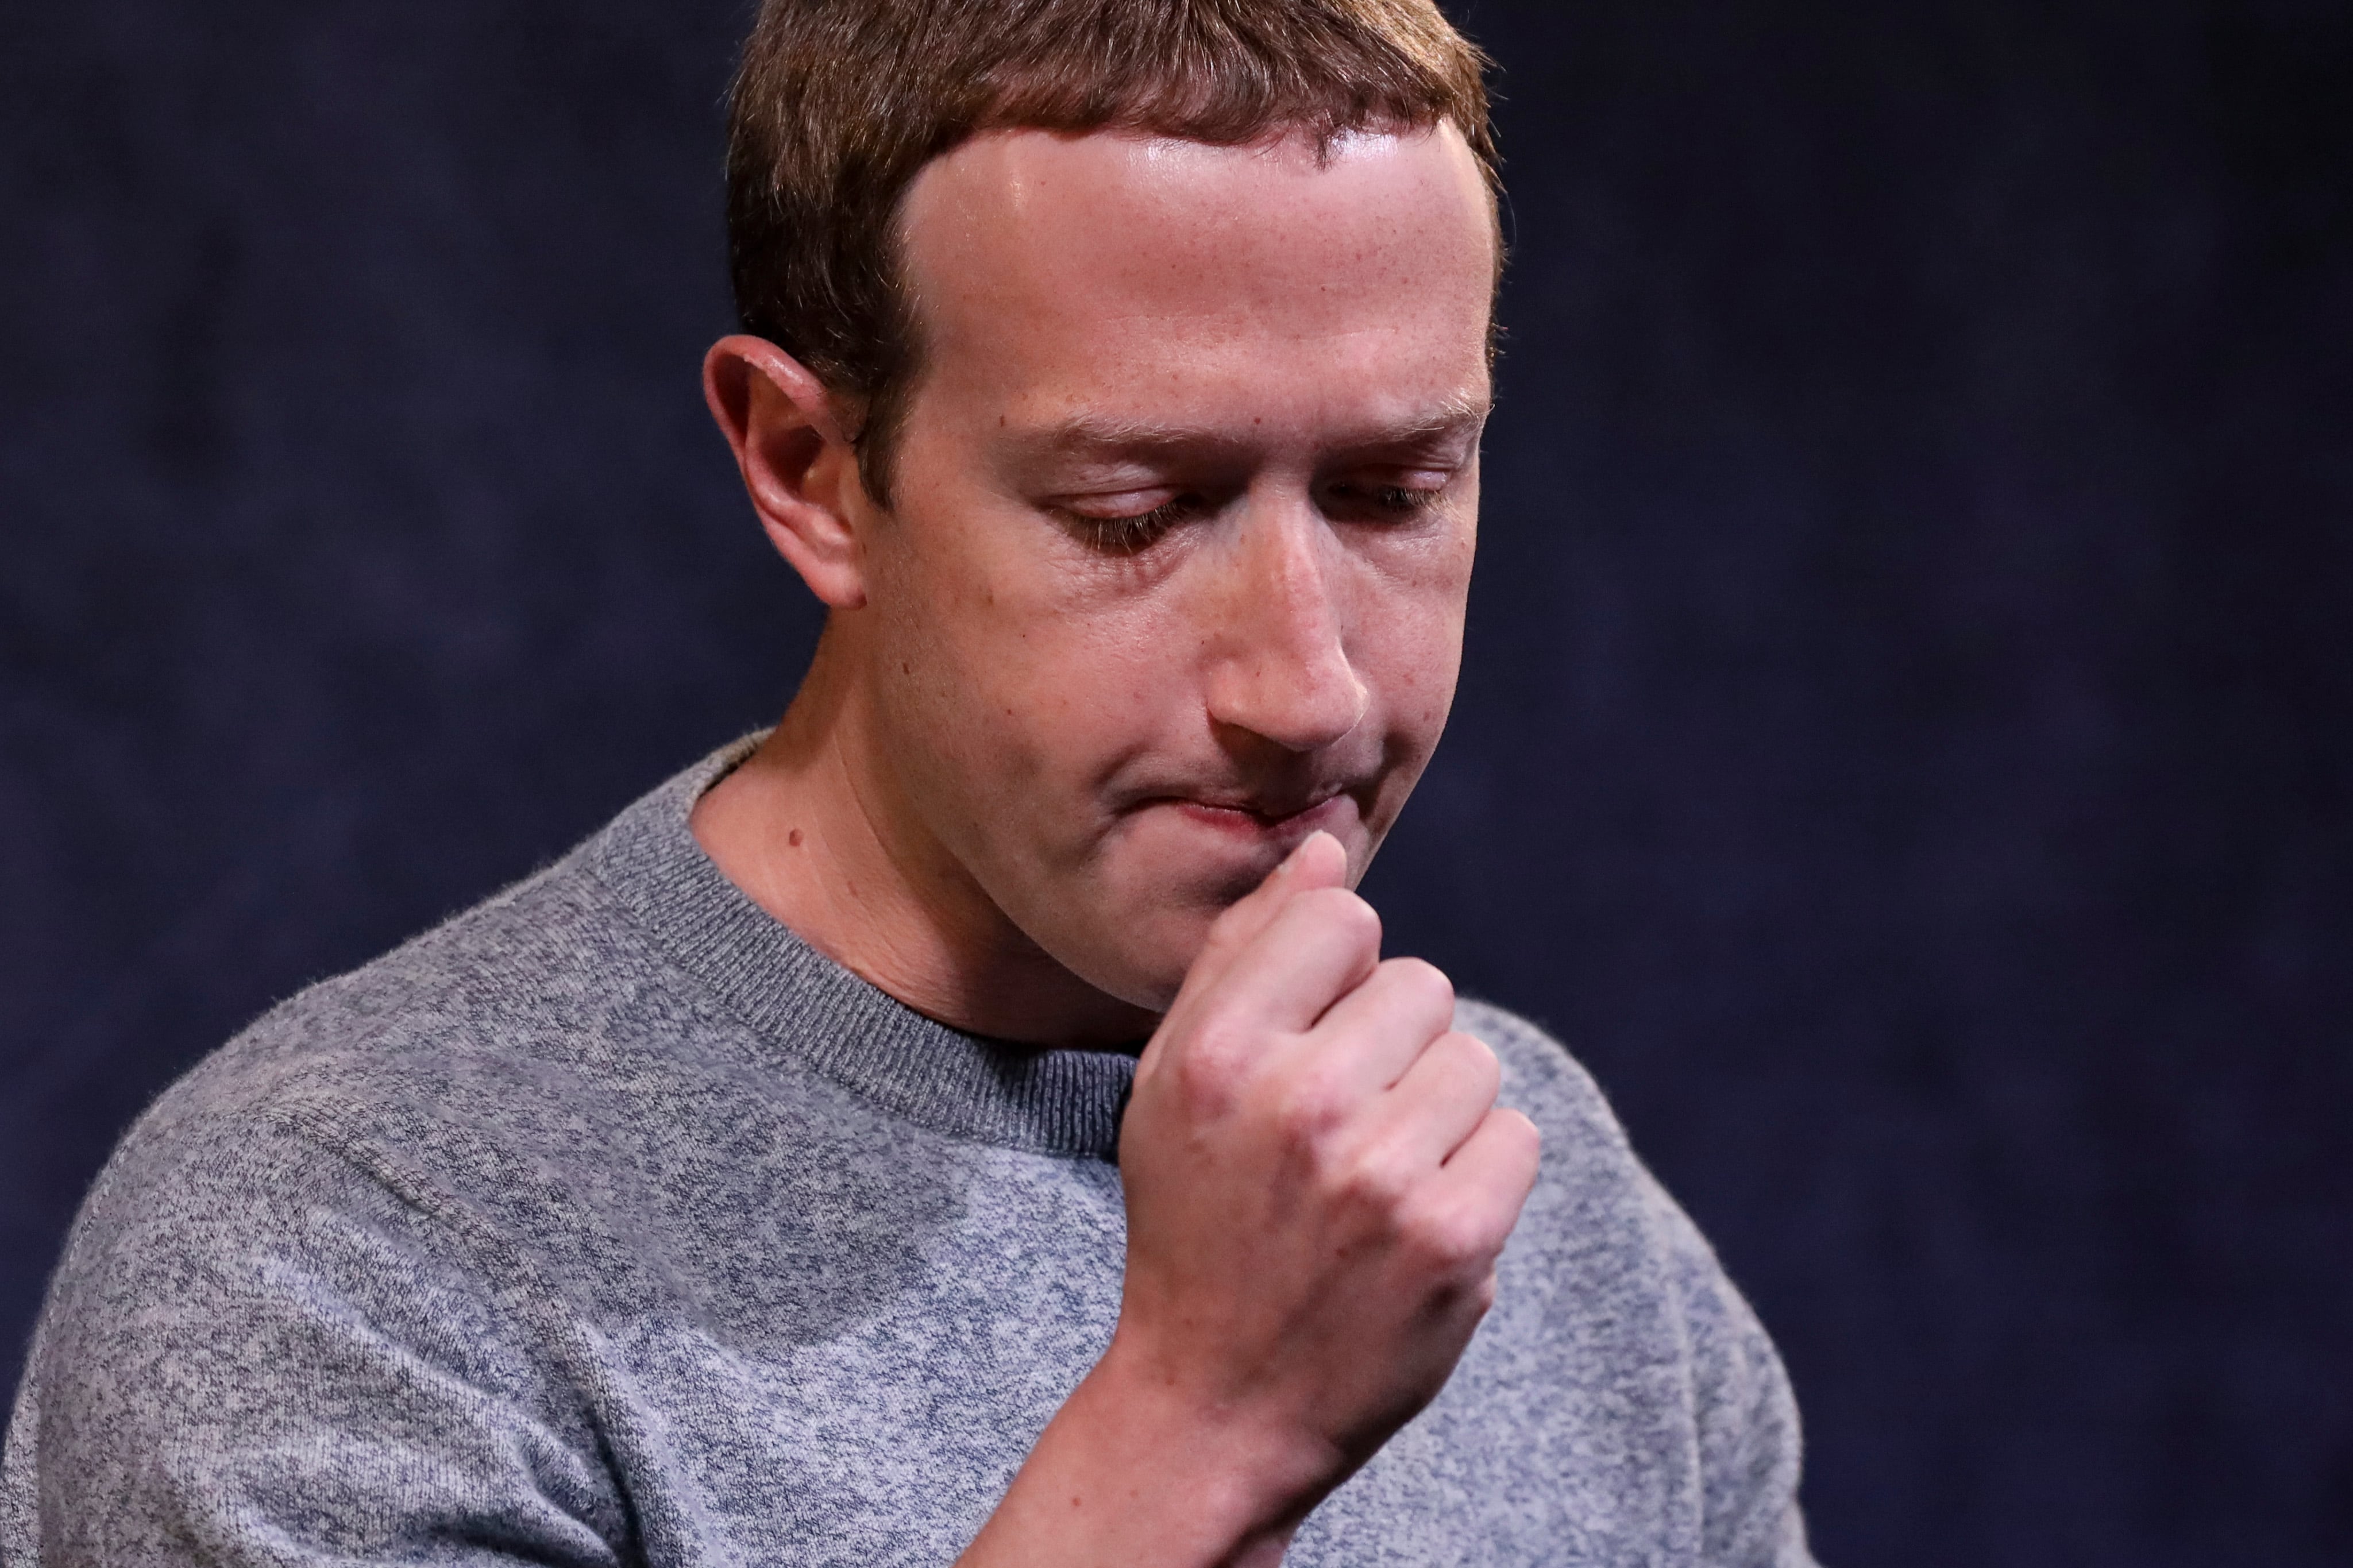 A closeup of Mark Zuckerberg gazing down with finger held to chin as if lost in thought